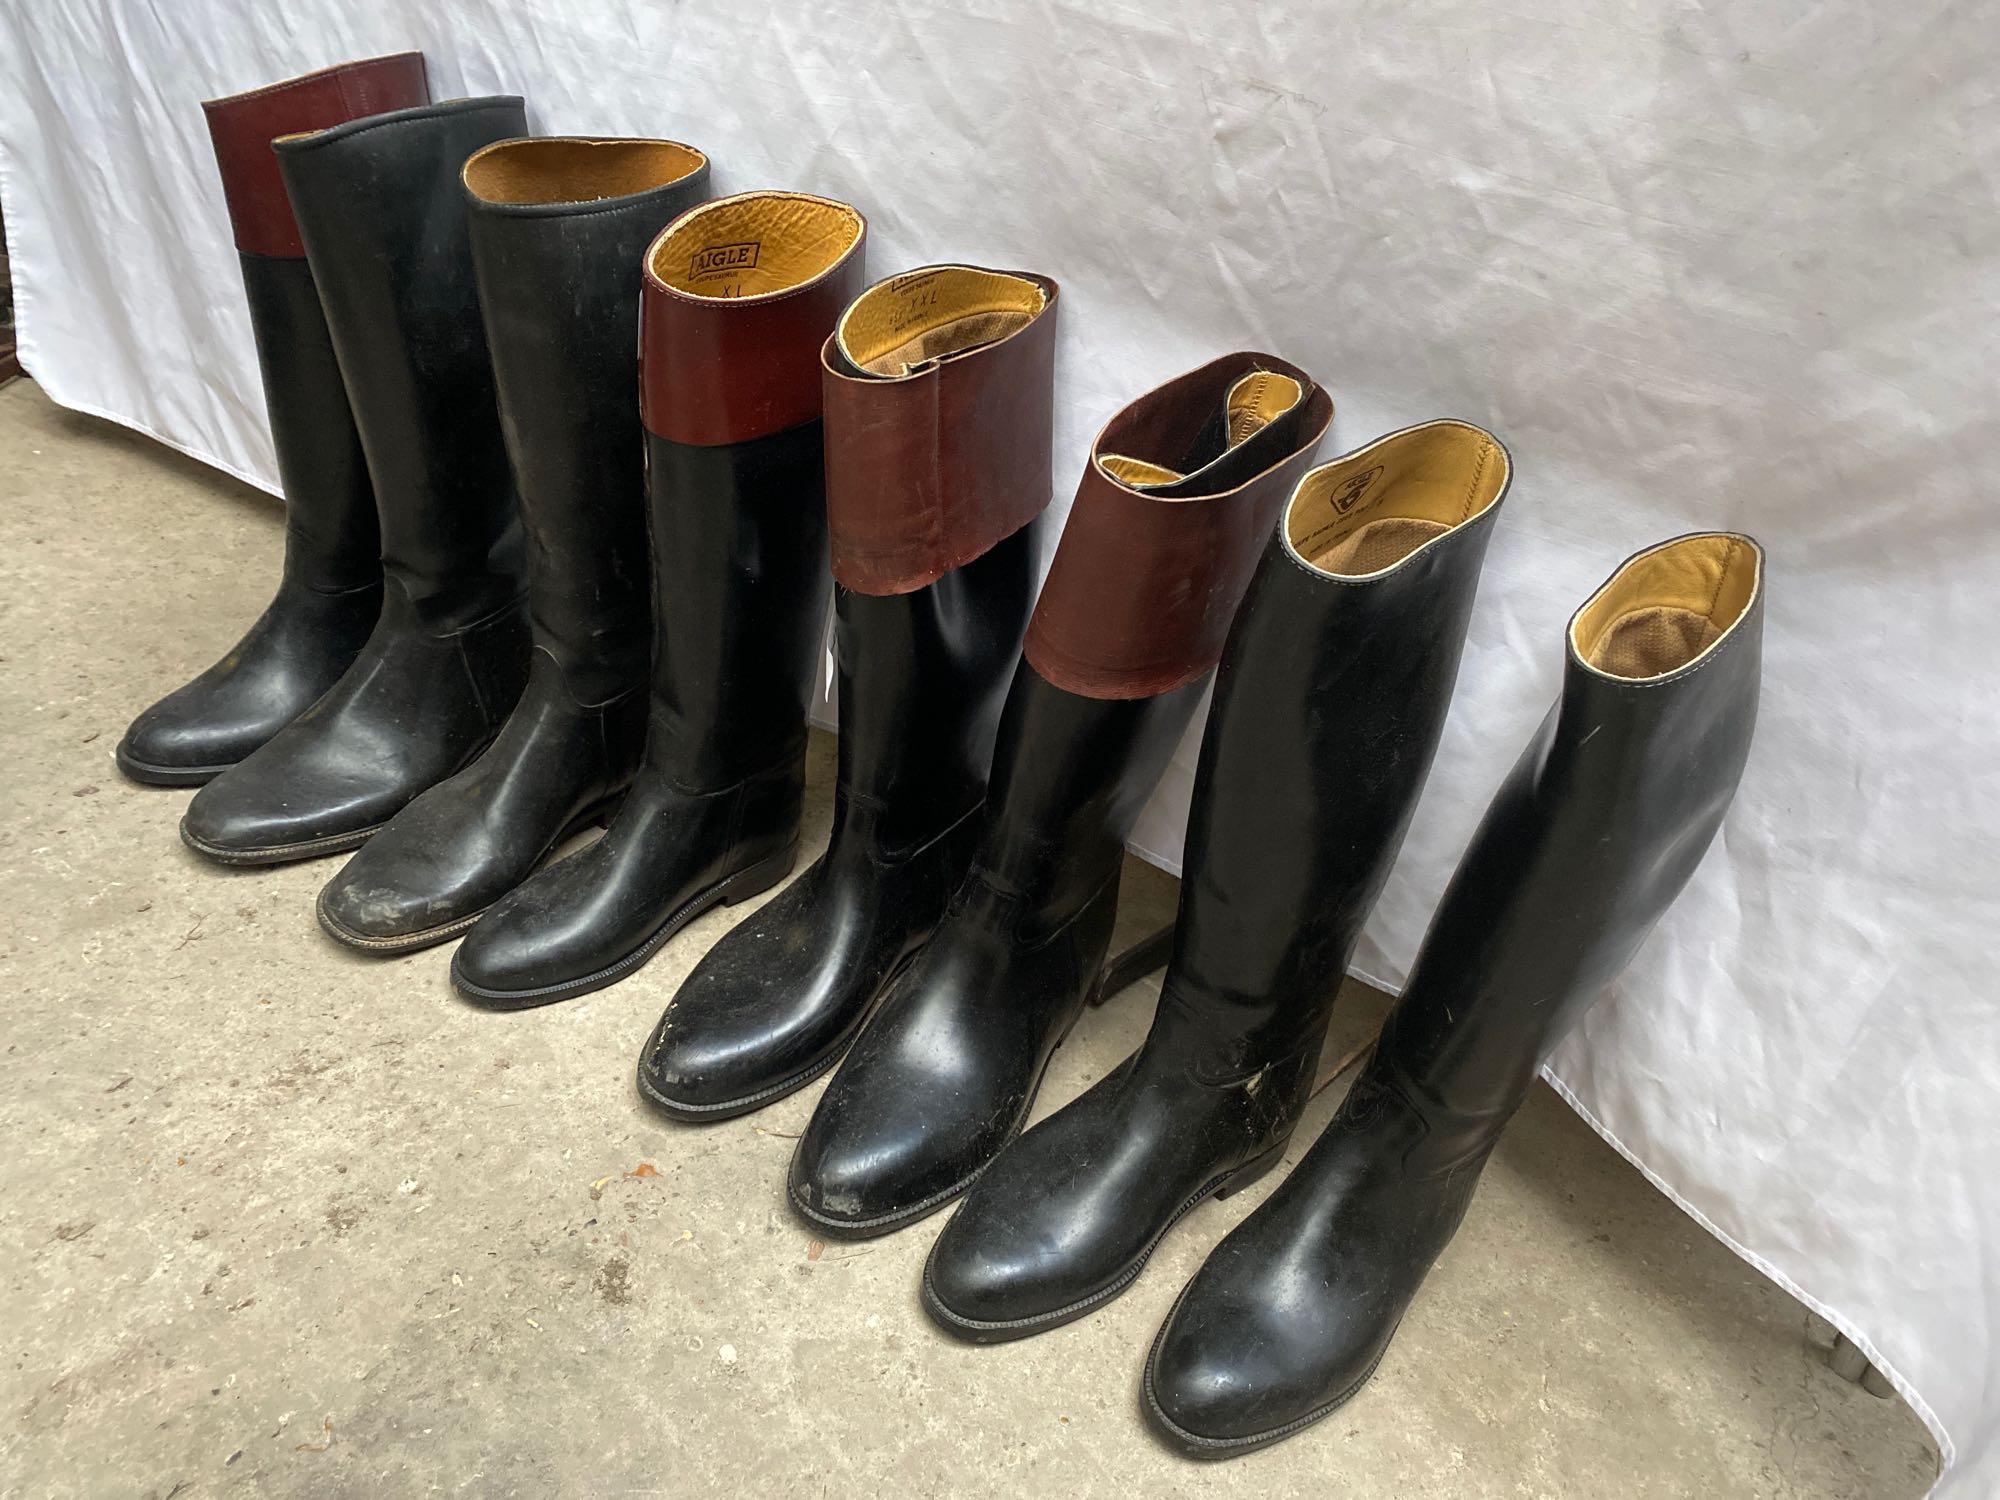 Four pairs of long rubber riding boots